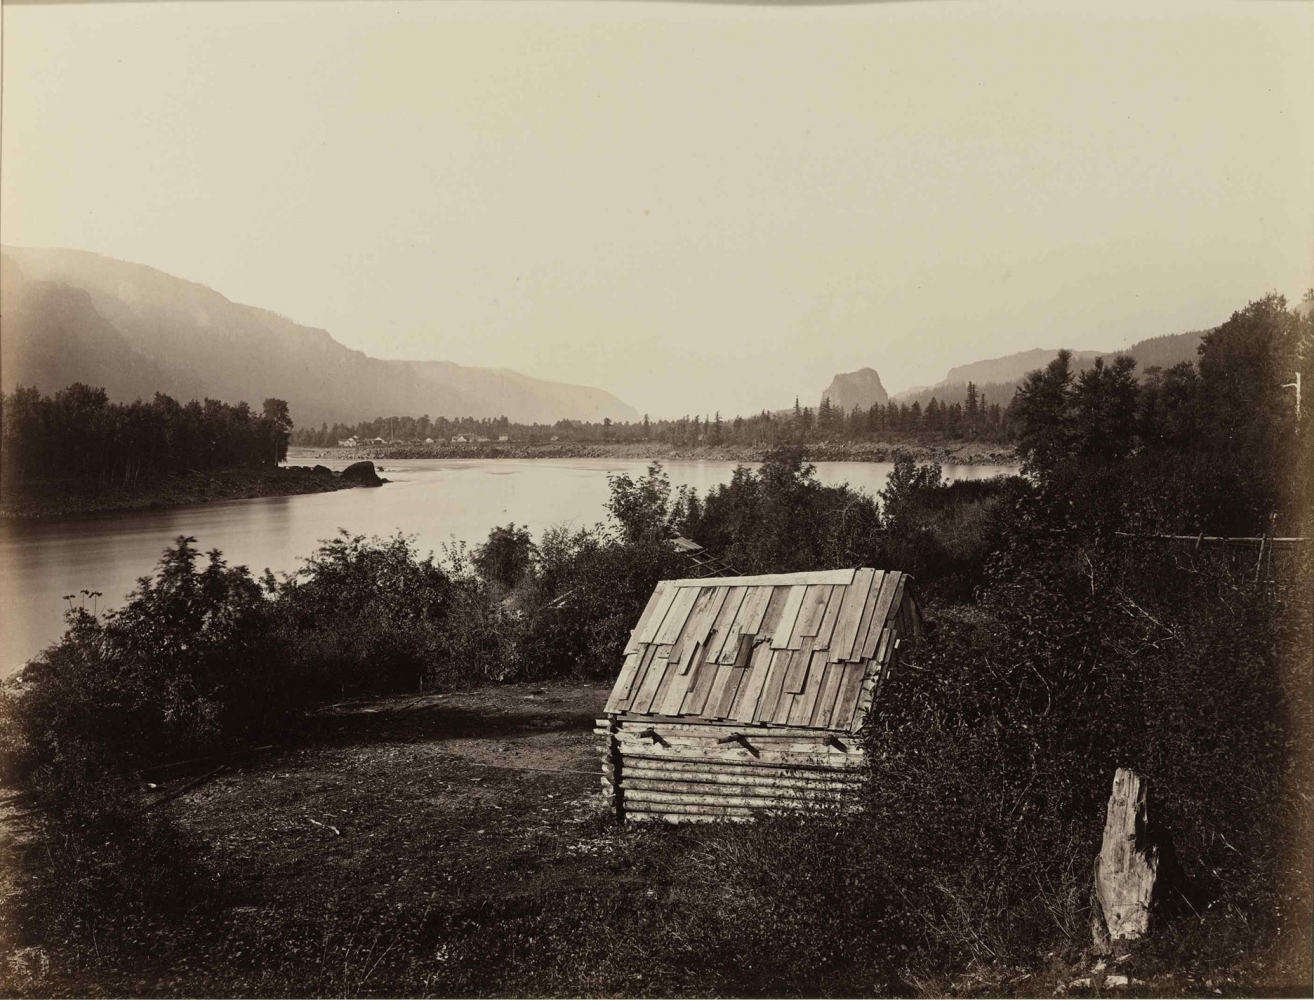 Carleton E. WATKINS (American, 1829-1916) The Garrison, Columbia River, Oregon, circa 1867 Mammoth plate albumen print 40.3 x 52.7 cm mounted on 53.0 x 67.0 cm board Titled in an unidentified contemporary calligraphic hand in ink and numbered "23" in an unidentified modern hand in pencil on mount. Two San Francisco Museum of Modern Art exhibition labels on verso.